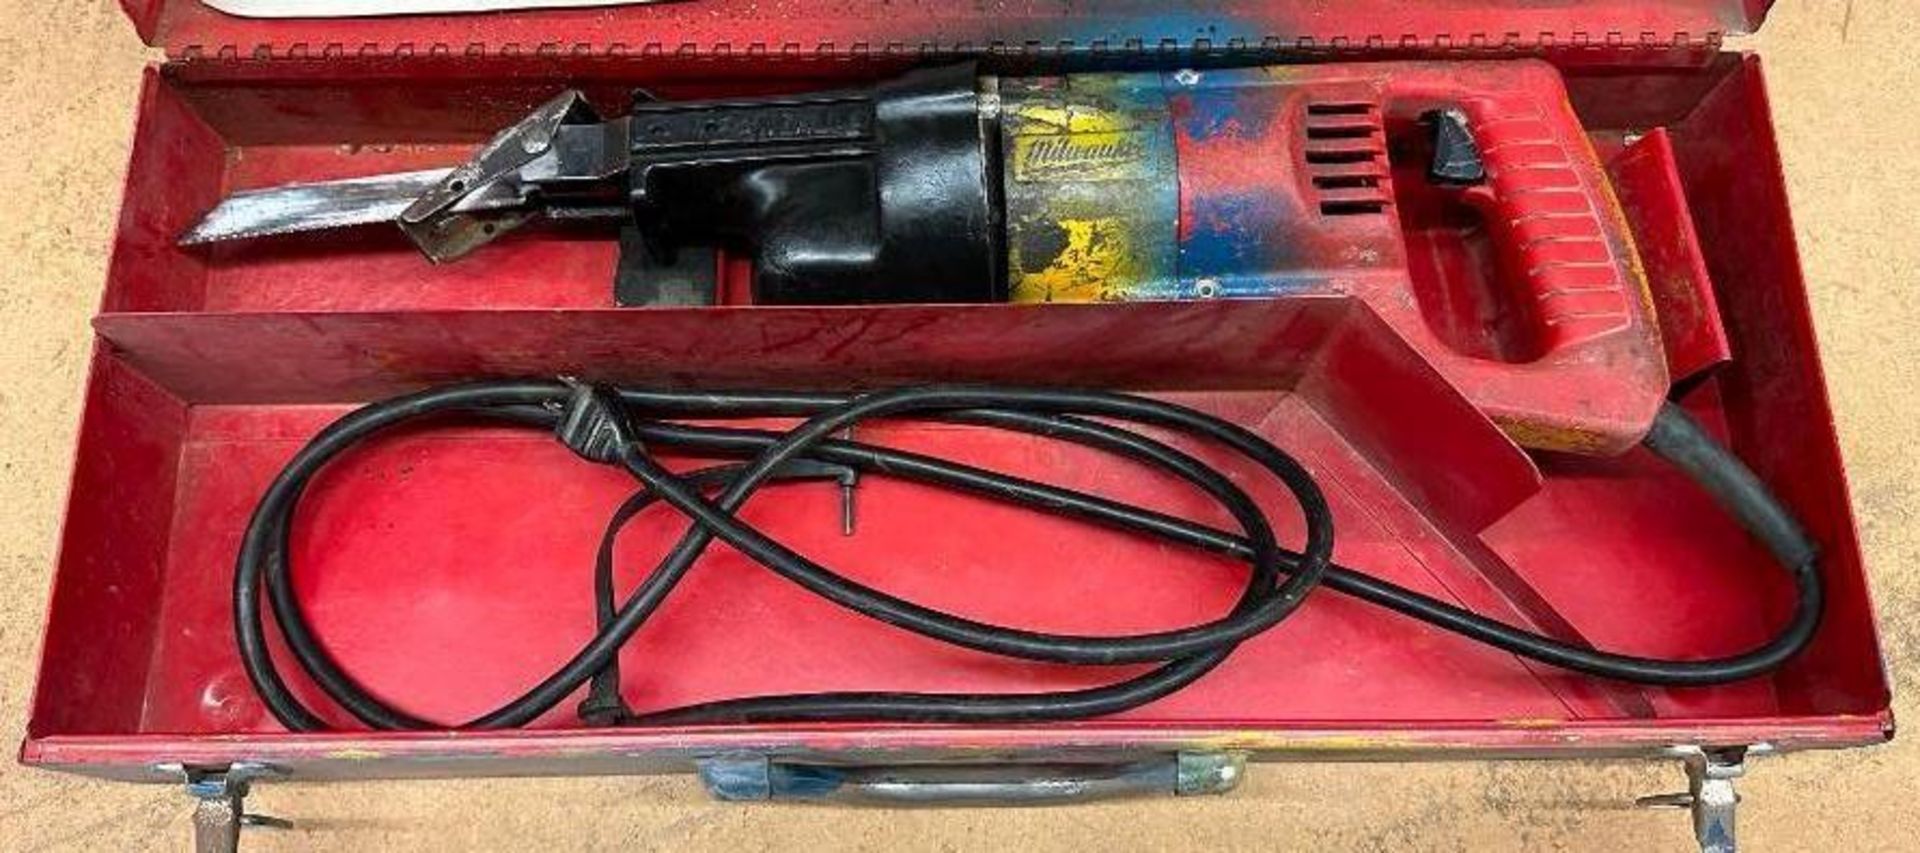 ELECTRIC SAWZALL RECIPROCATING SAW WITH CASE